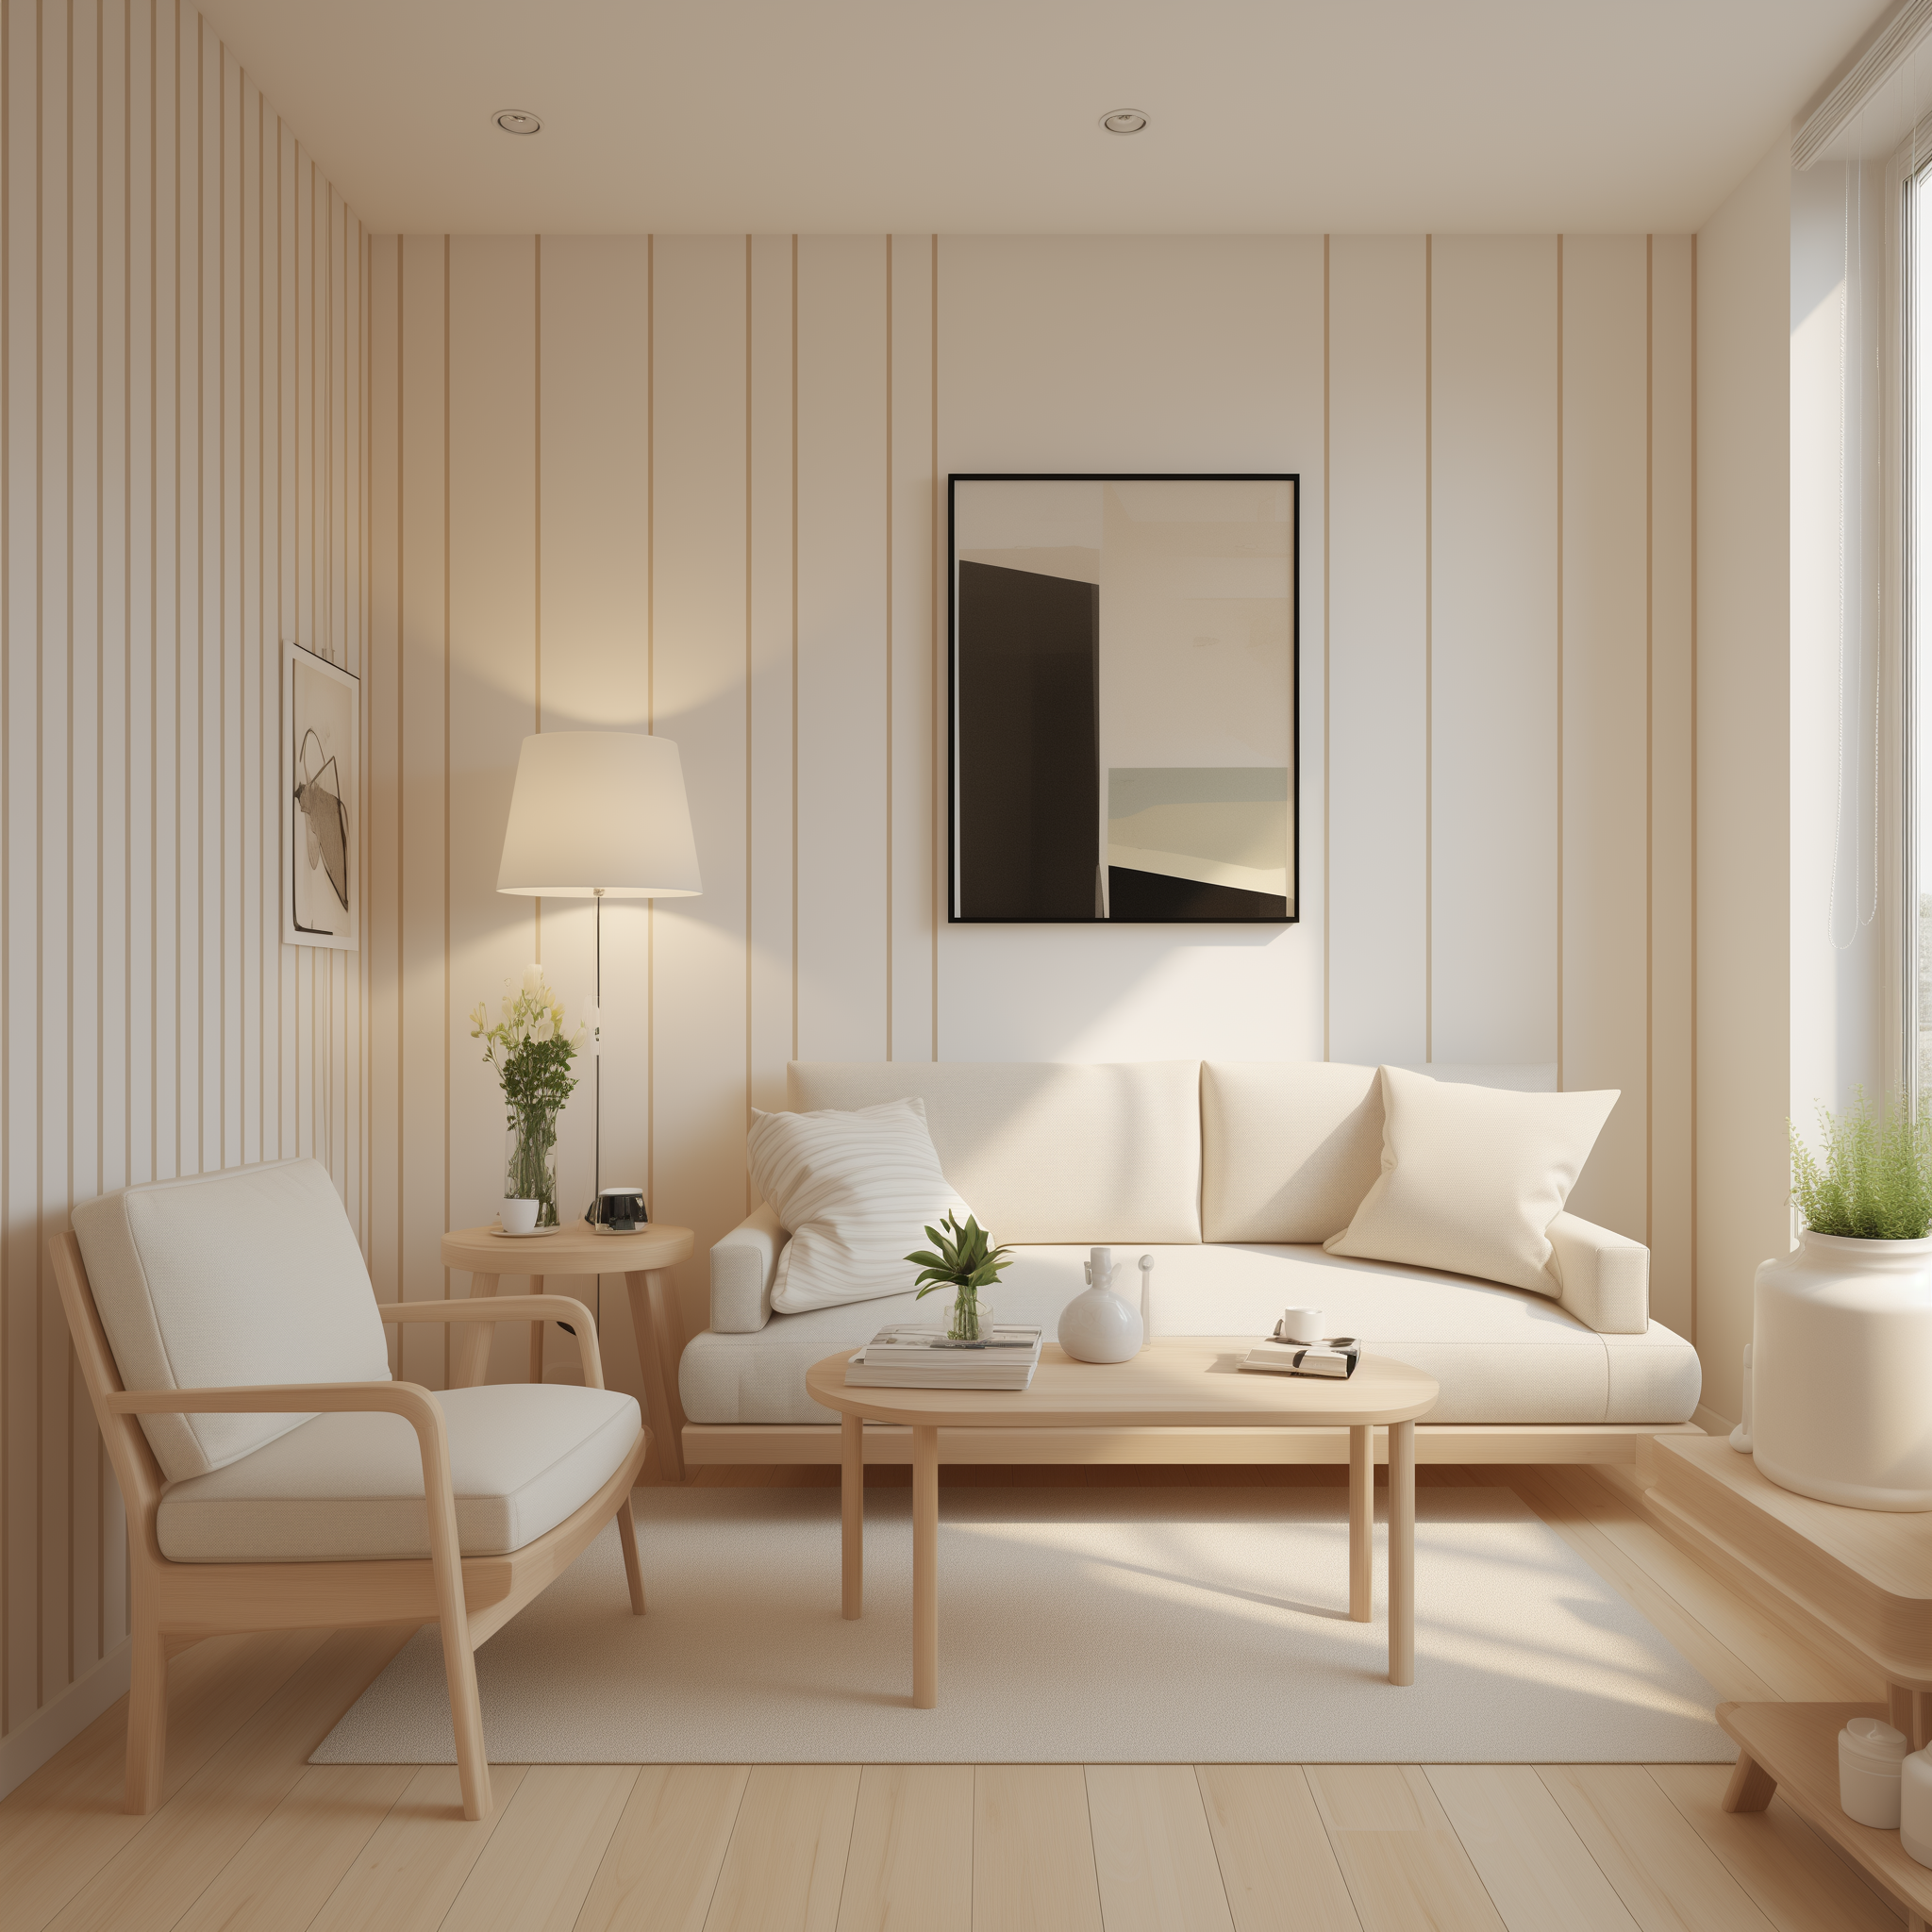 Neutral colored room with small vertical stripes